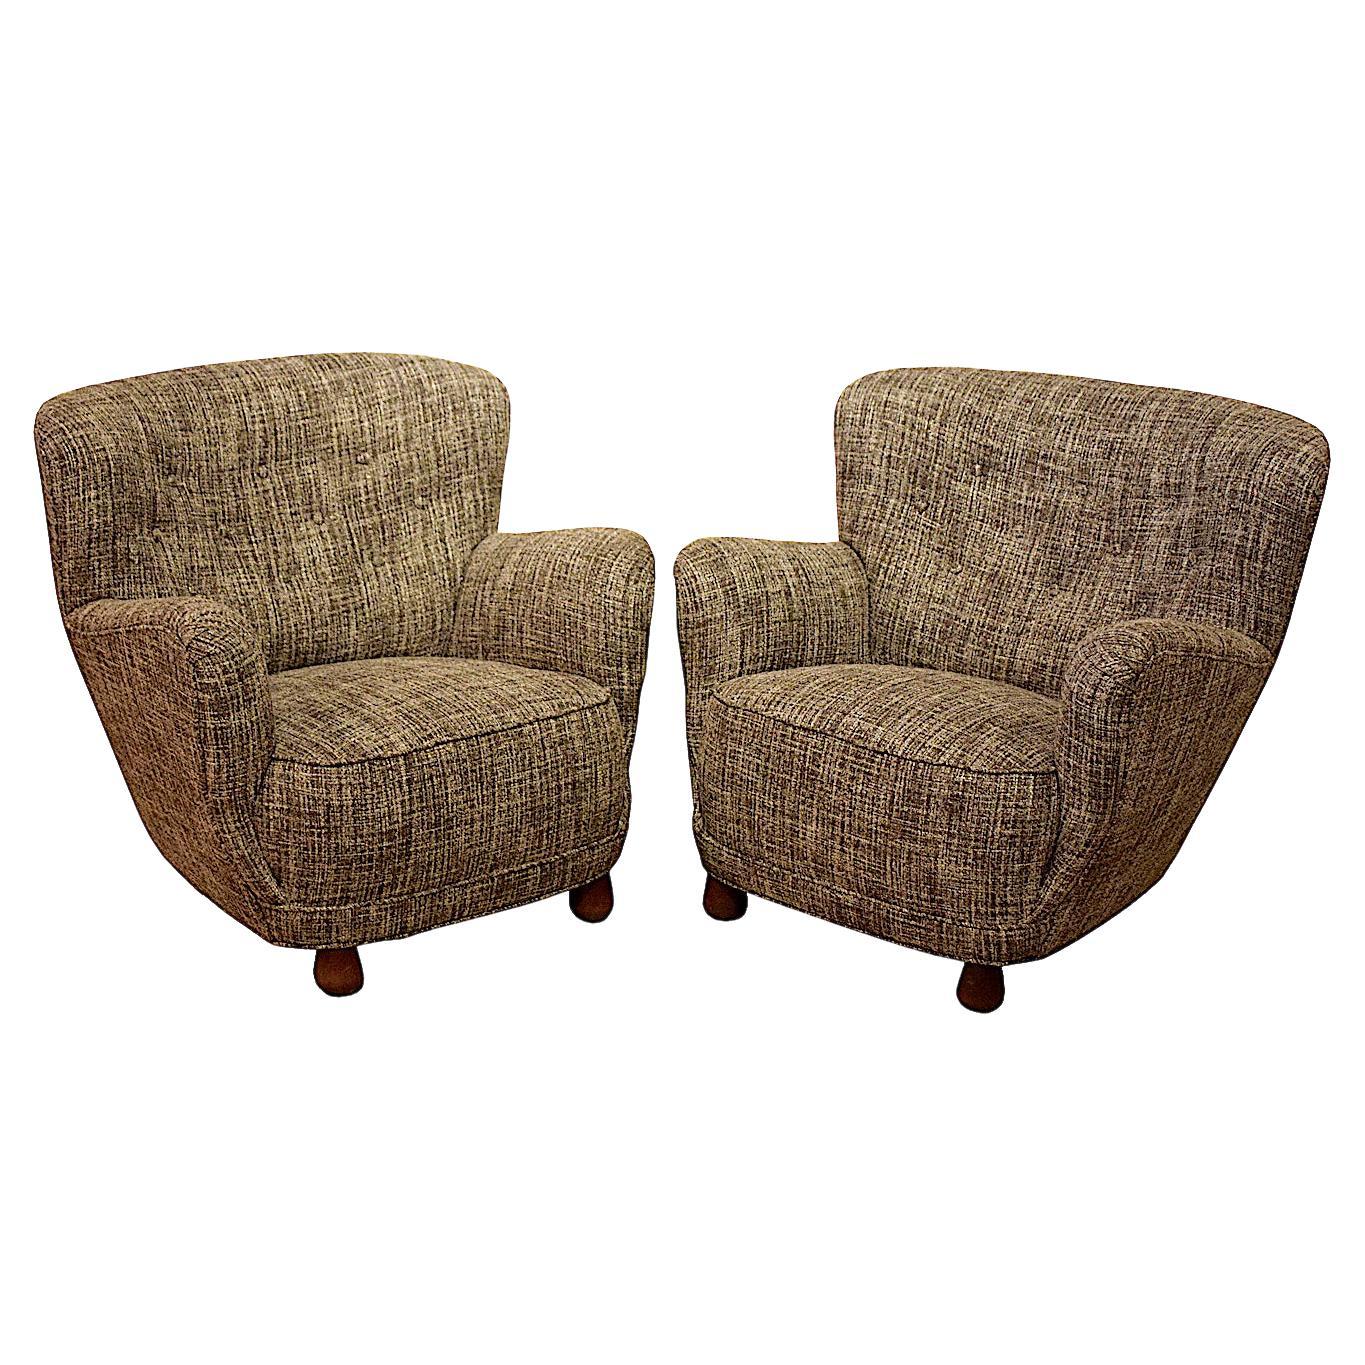 Pair of 1930's/40's Club Chairs Attributed to Flemming Lassen